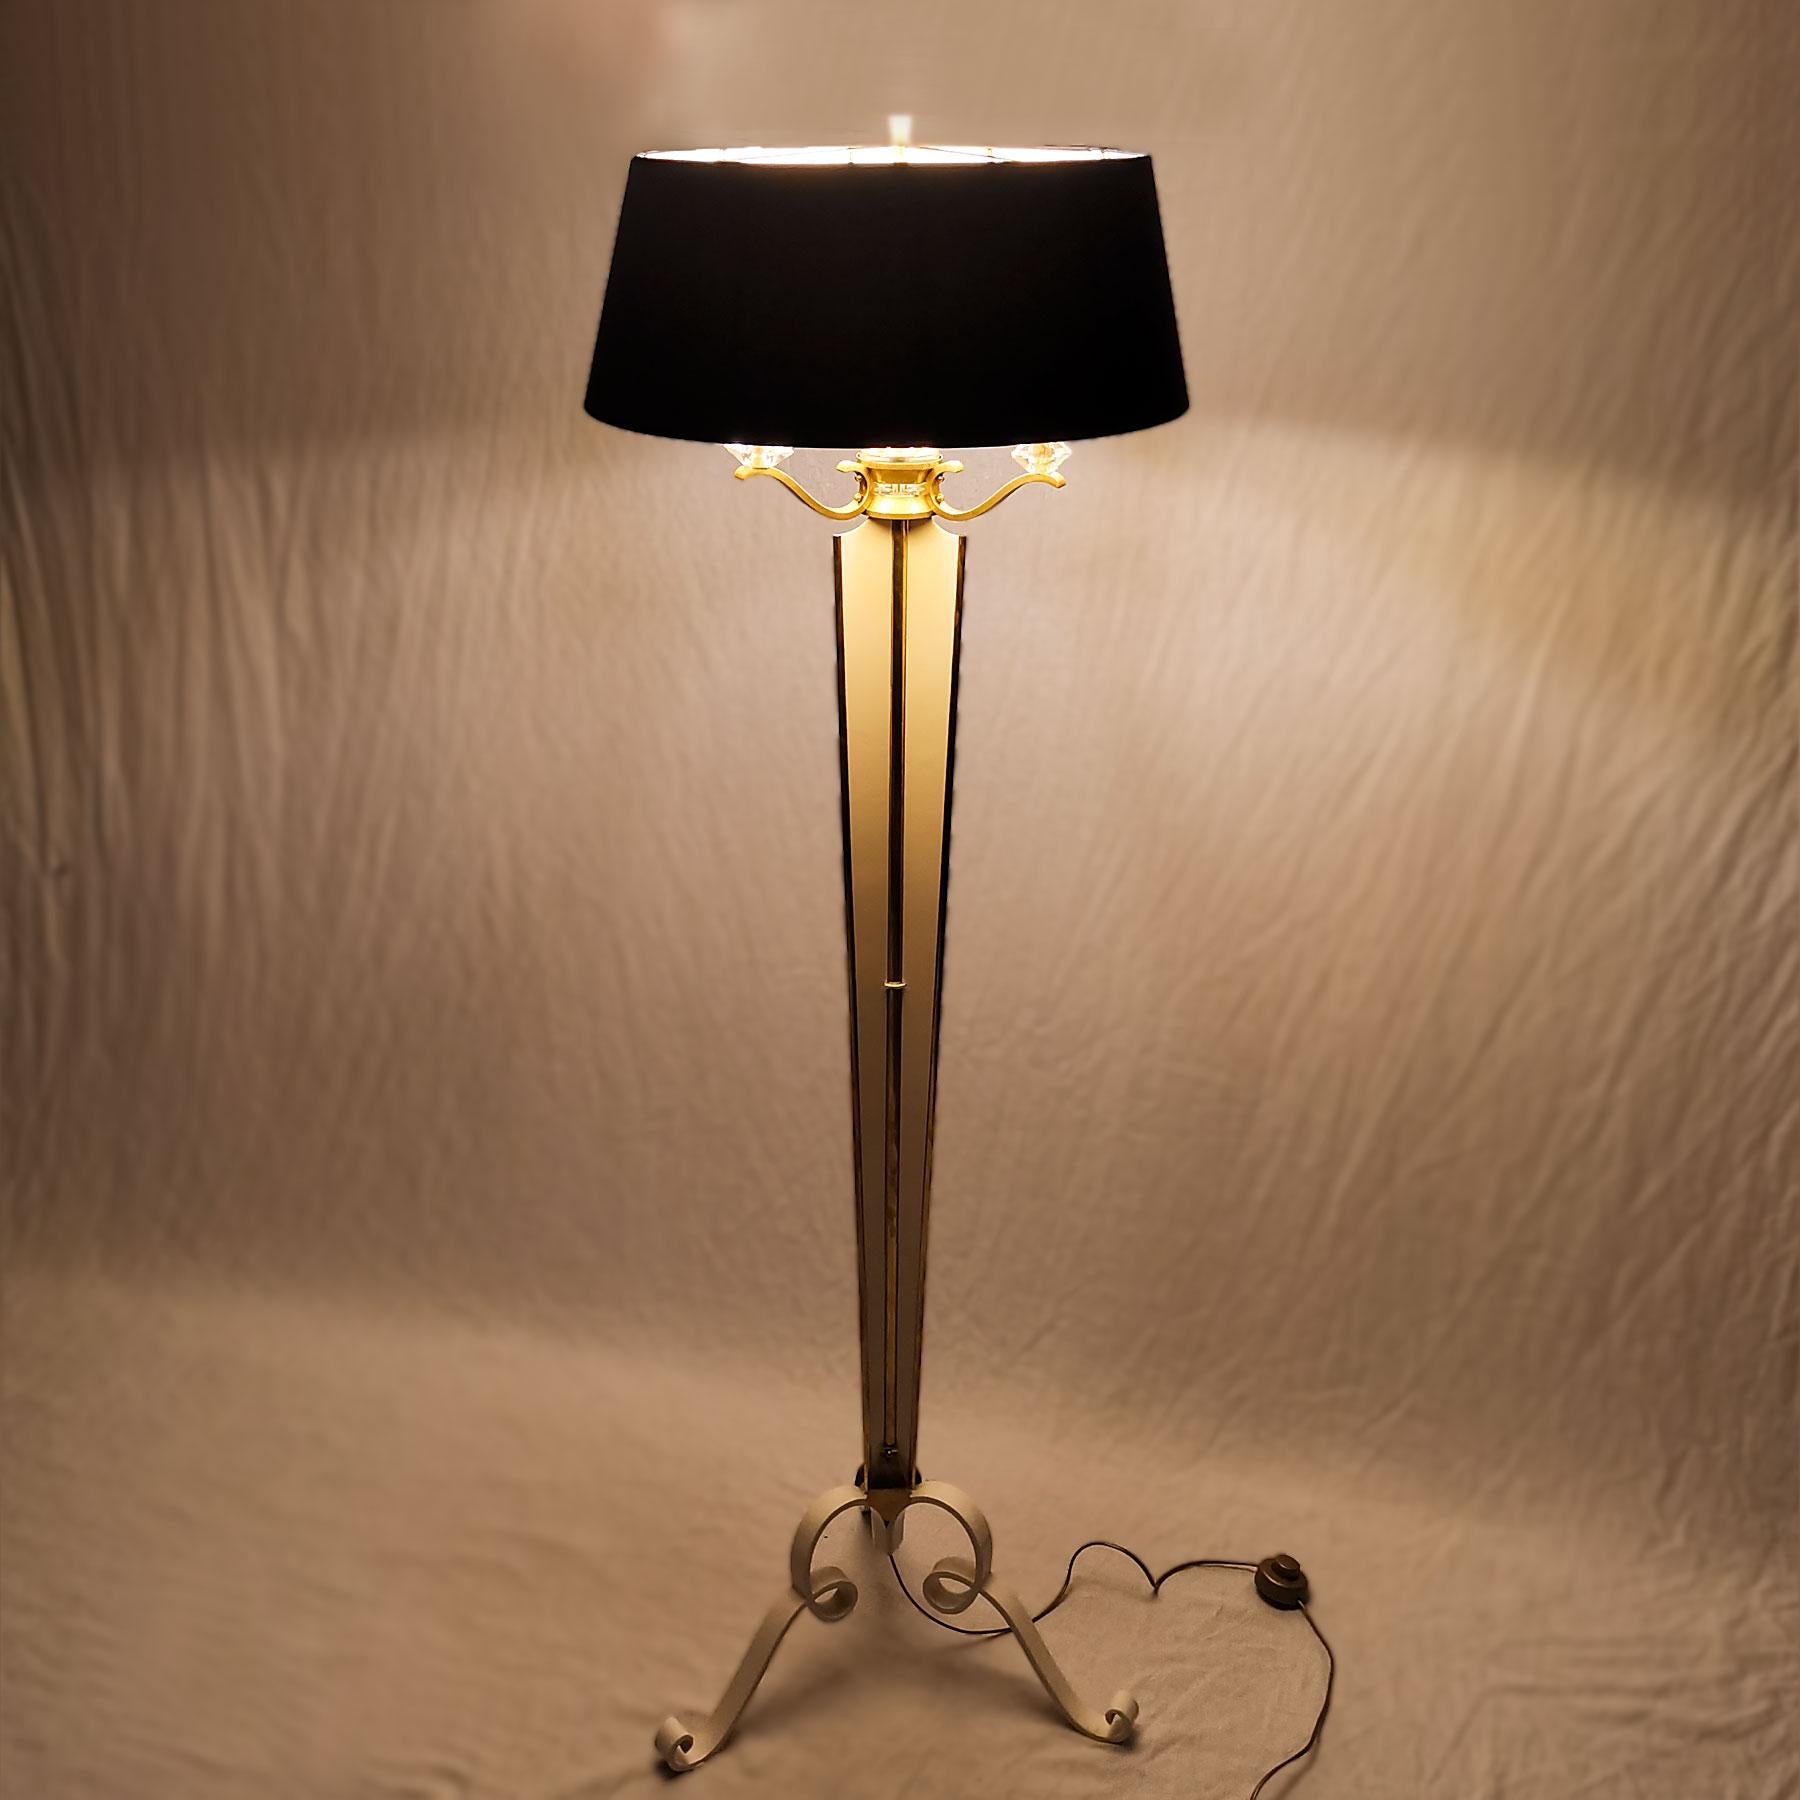 Mid-20th Century 1940s Standing Lamp, Wrought Iron, Steel, Bronze, Sèvres Glass, France